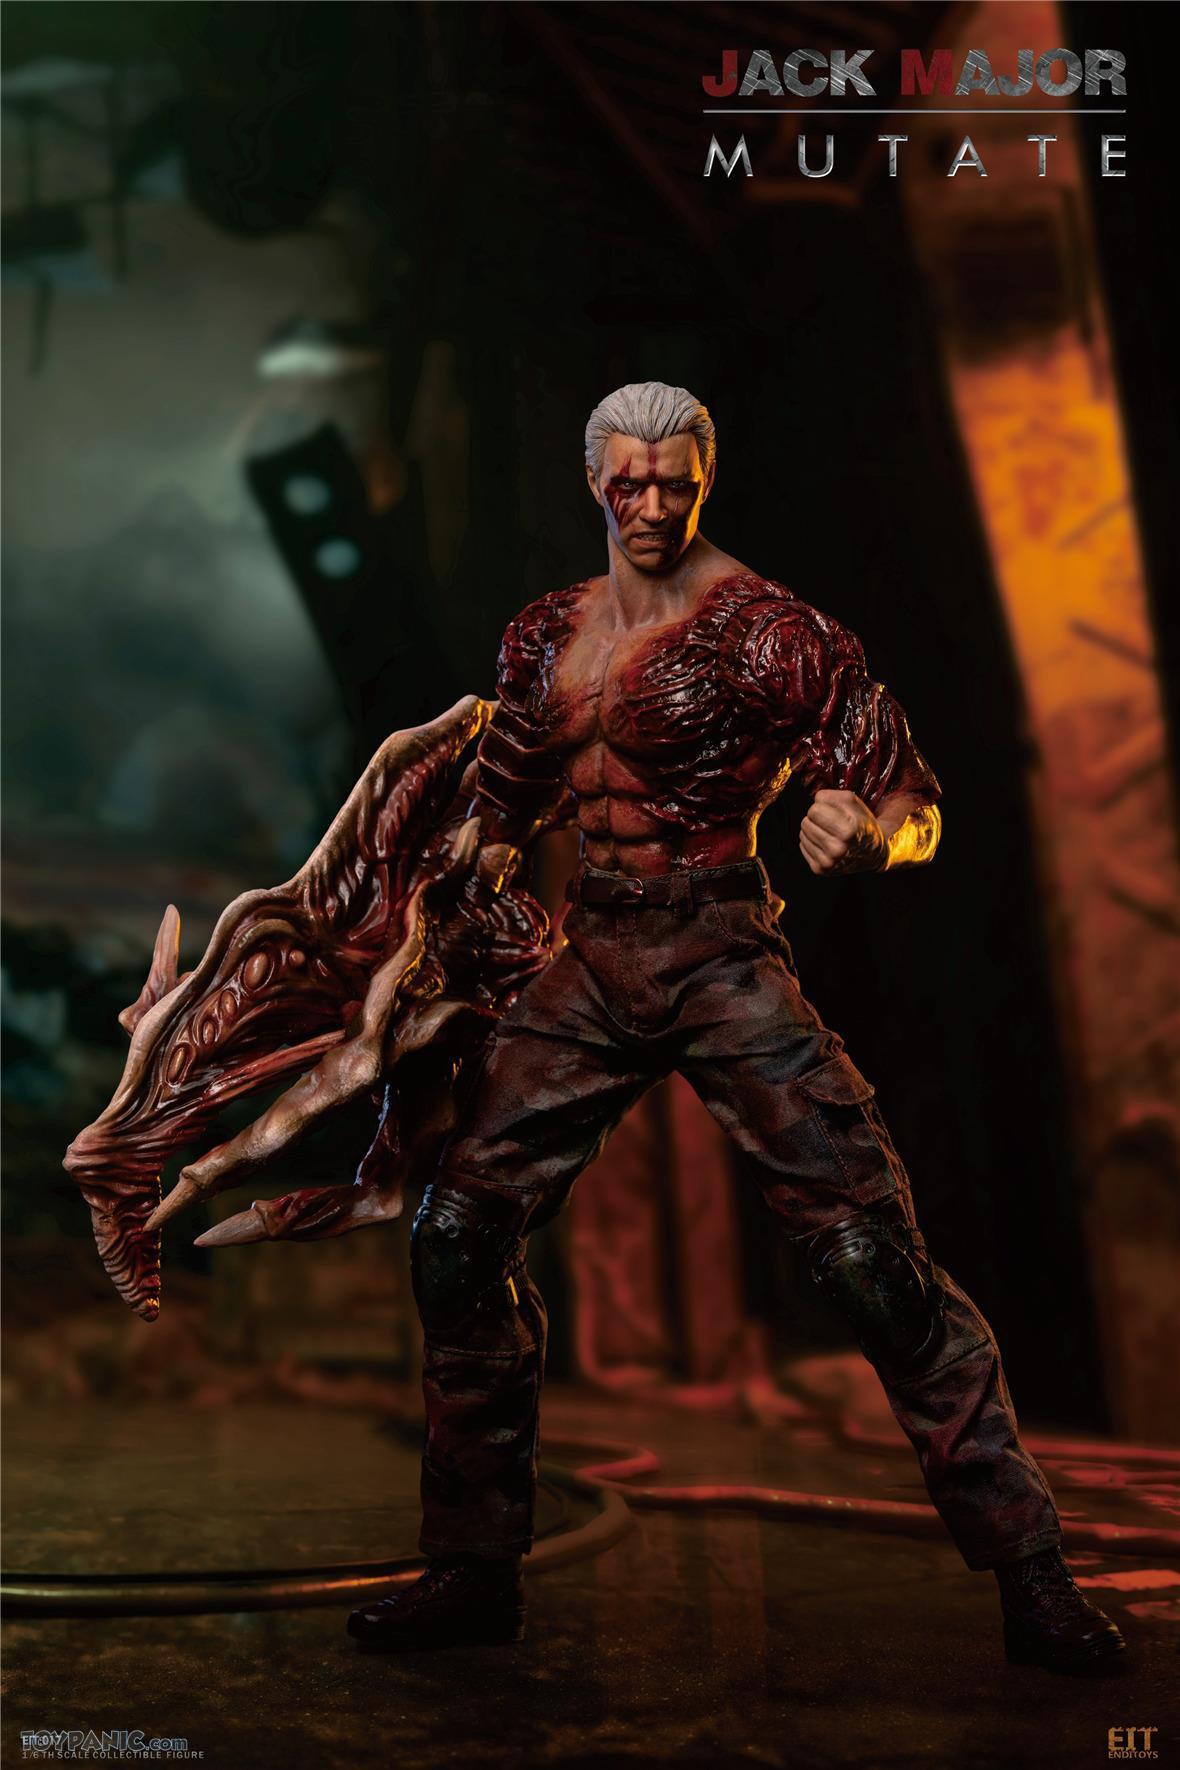 jackmajor - NEW PRODUCT:  1/6 Jack Major Mutate from End I Toys  2732024105950AM_6739850